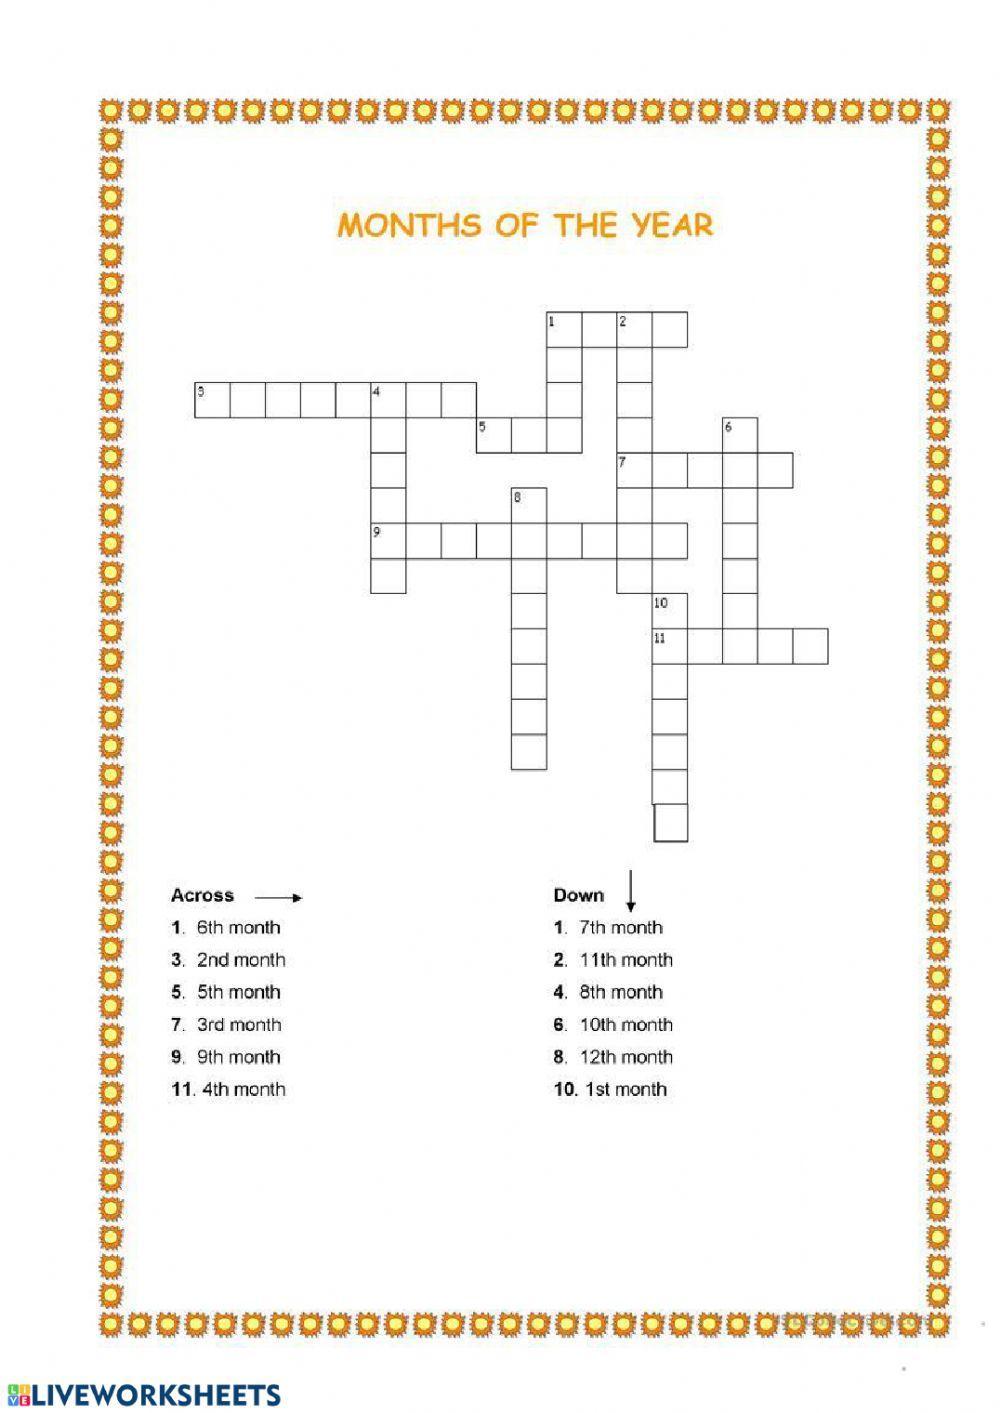 FORM 4 Months of the Year crossword